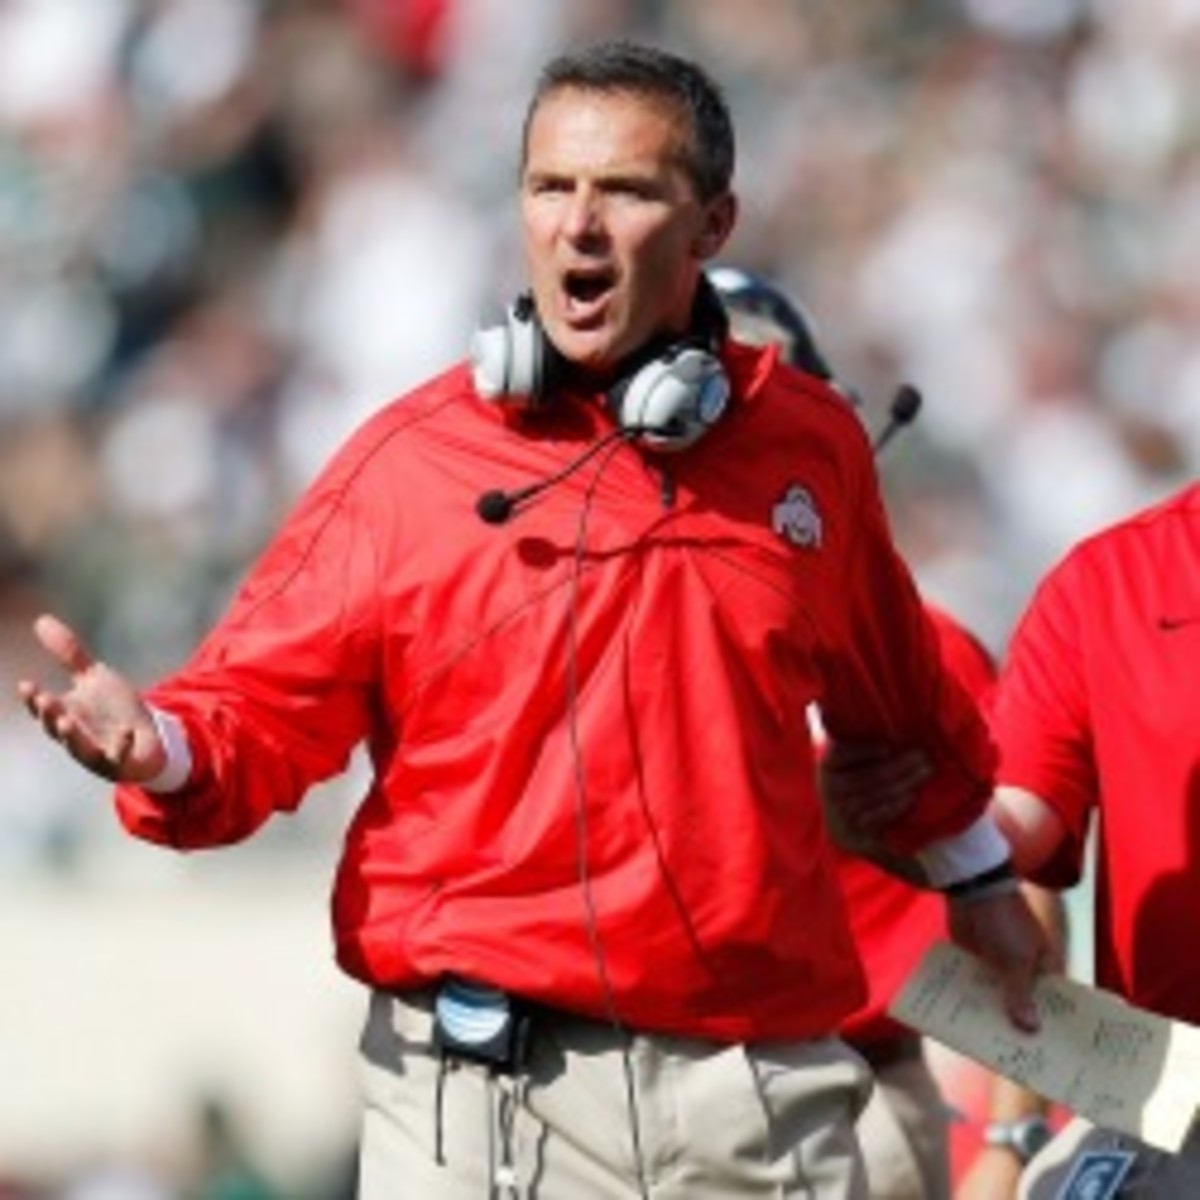 Ohio State coach Urban Meyer says he doesn't like proposed new rules by the NCAA. (Gregory Shamus/Getty Images)